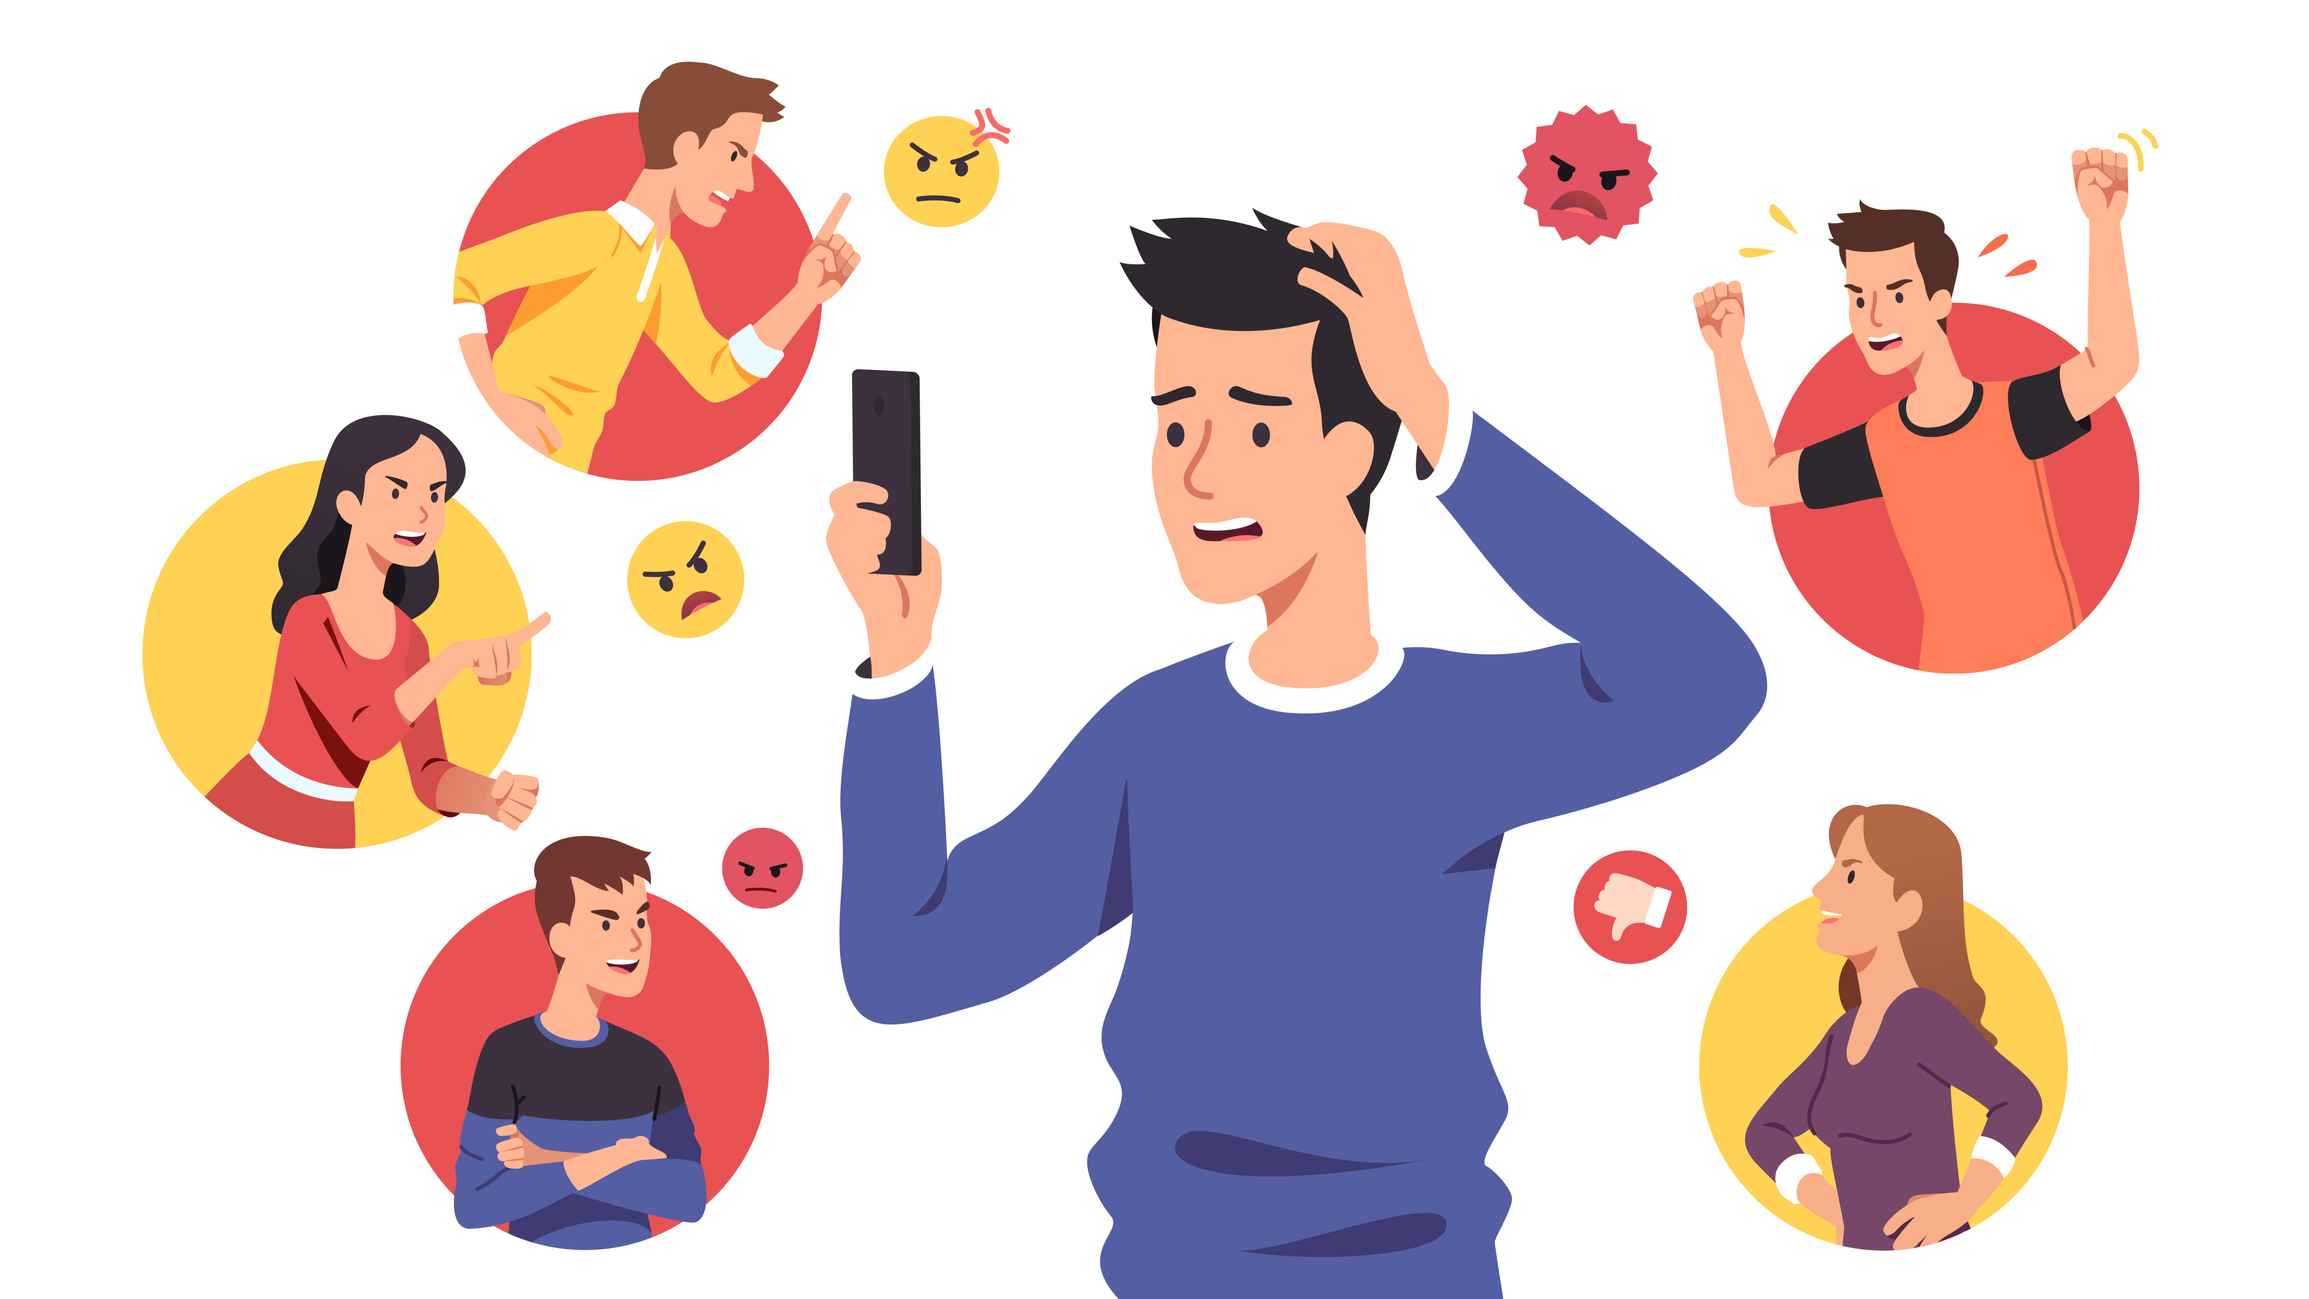 Illustration of a person surrounded by social media reactions, emoticons, and interactions from others